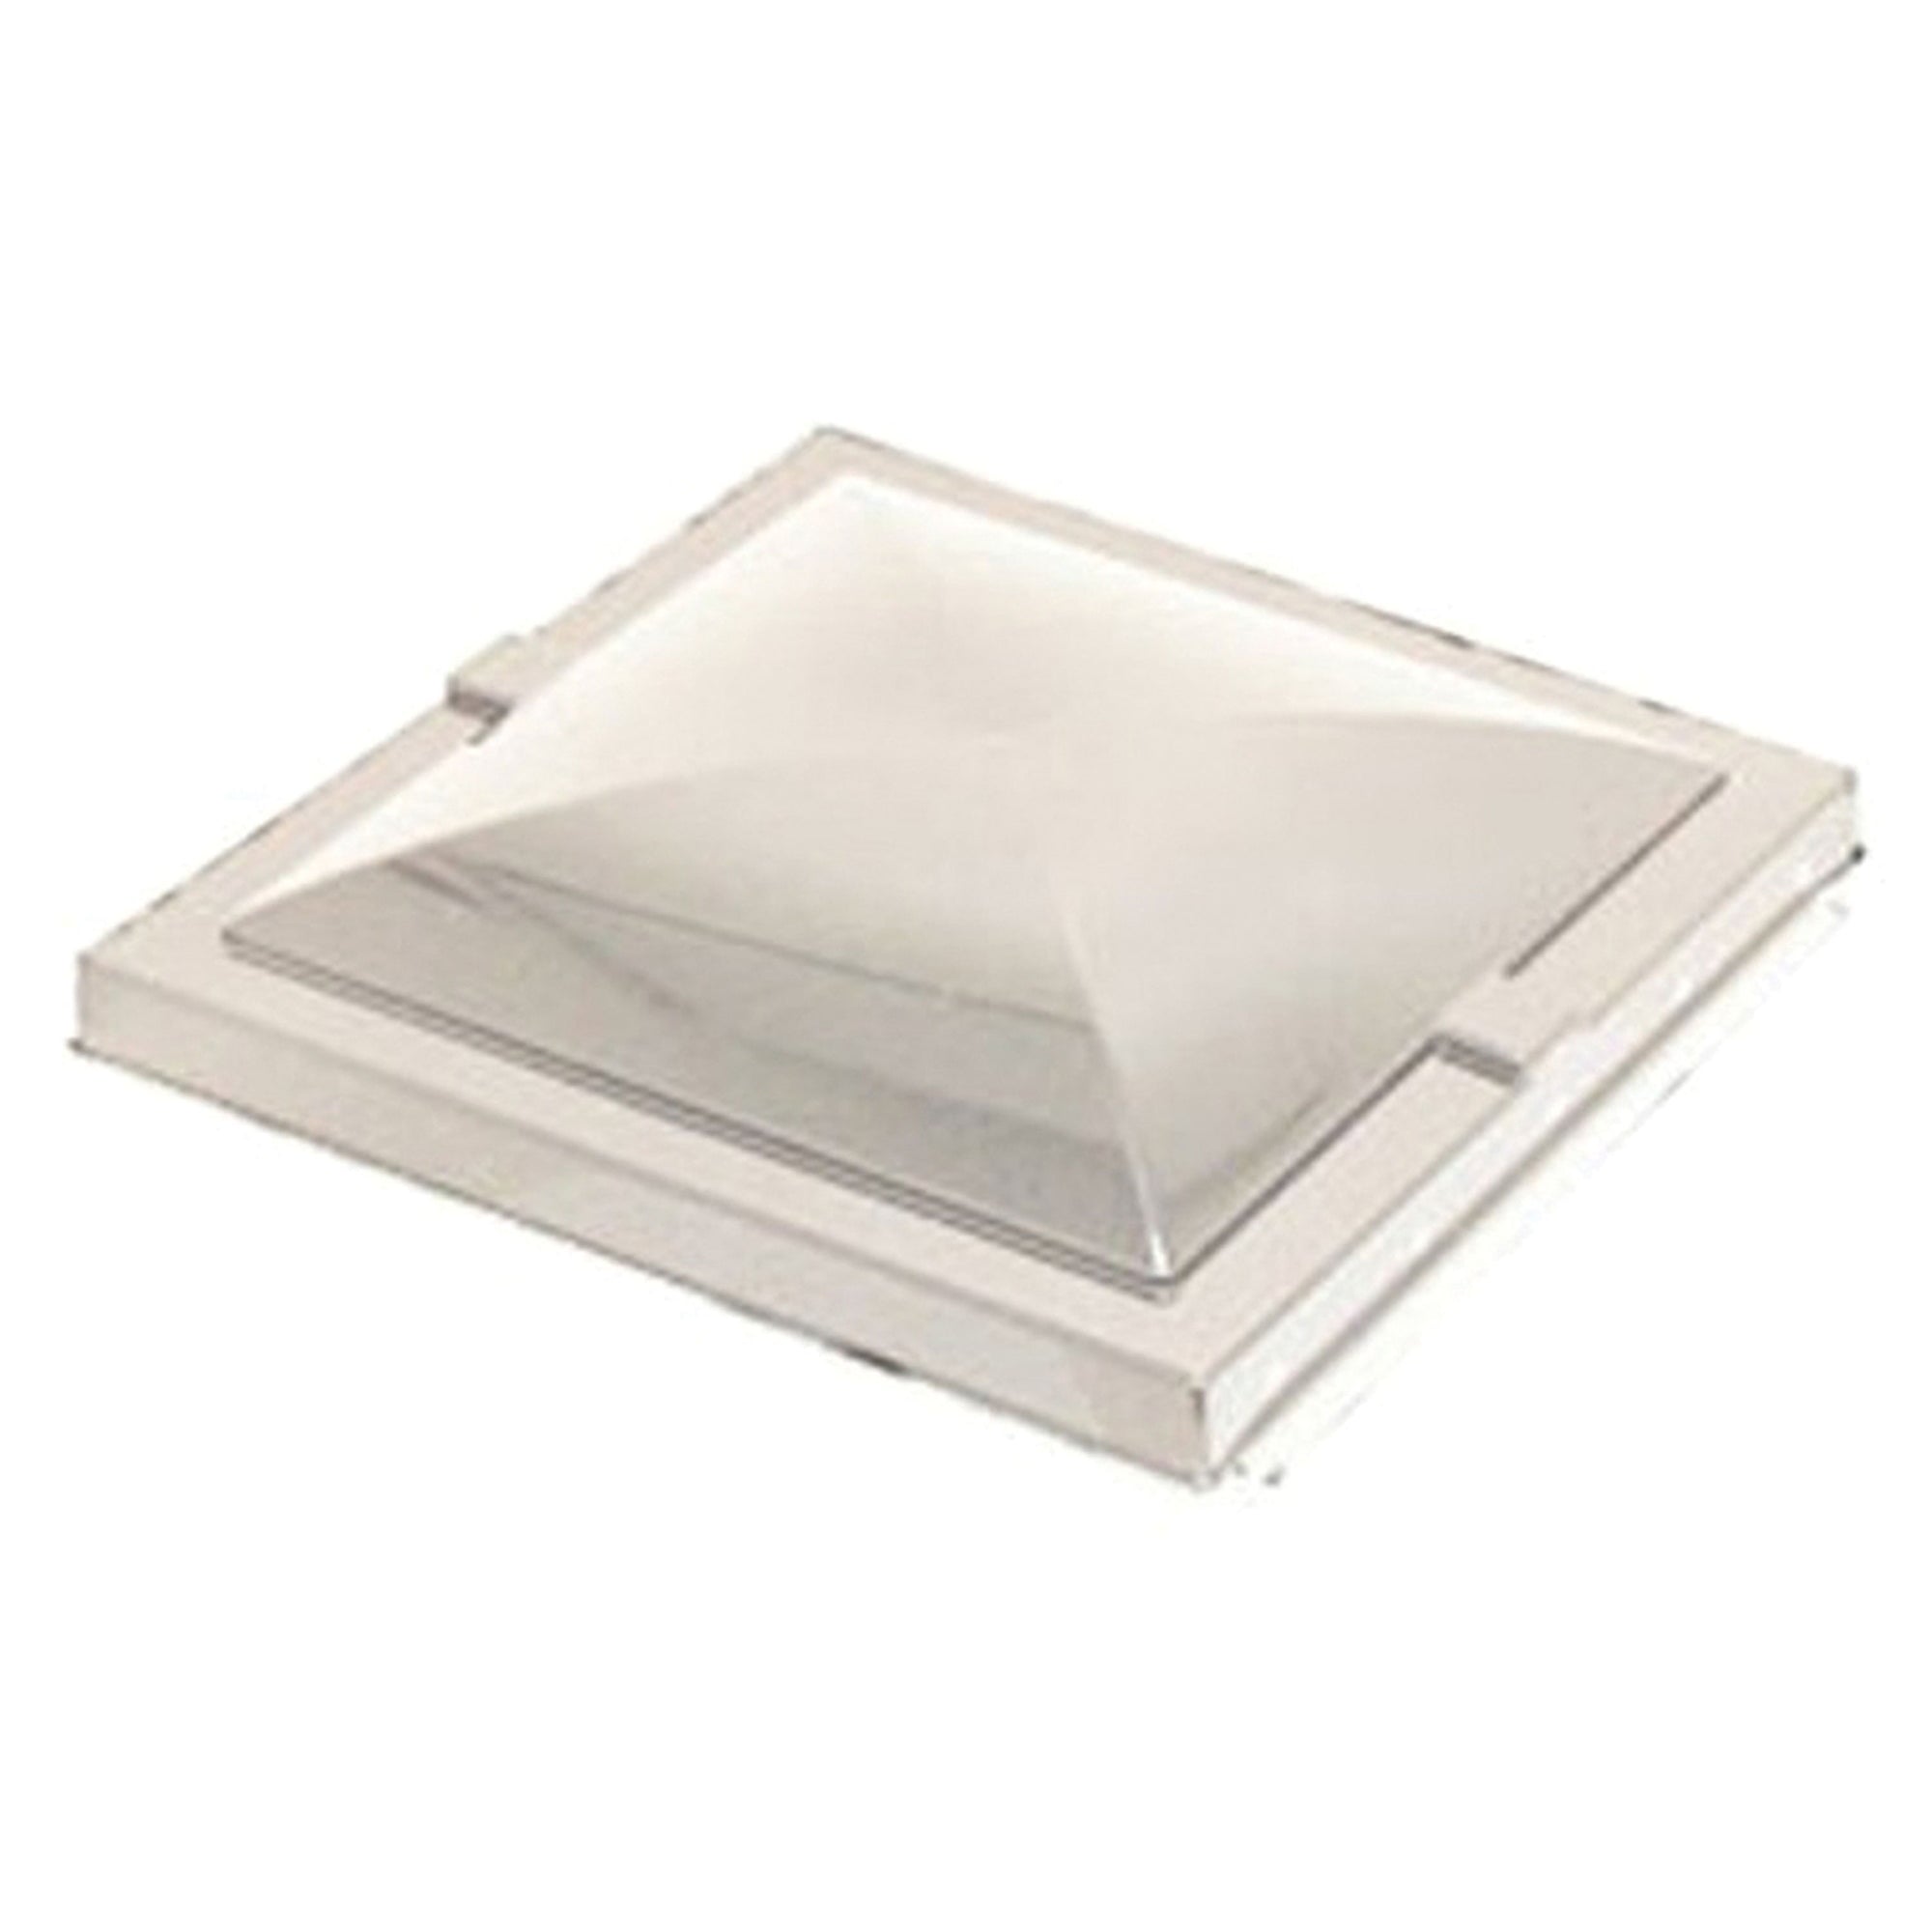 Heng's 90082-C1 Replacement Roof Vent Cover for Old Style 20000 Series - White